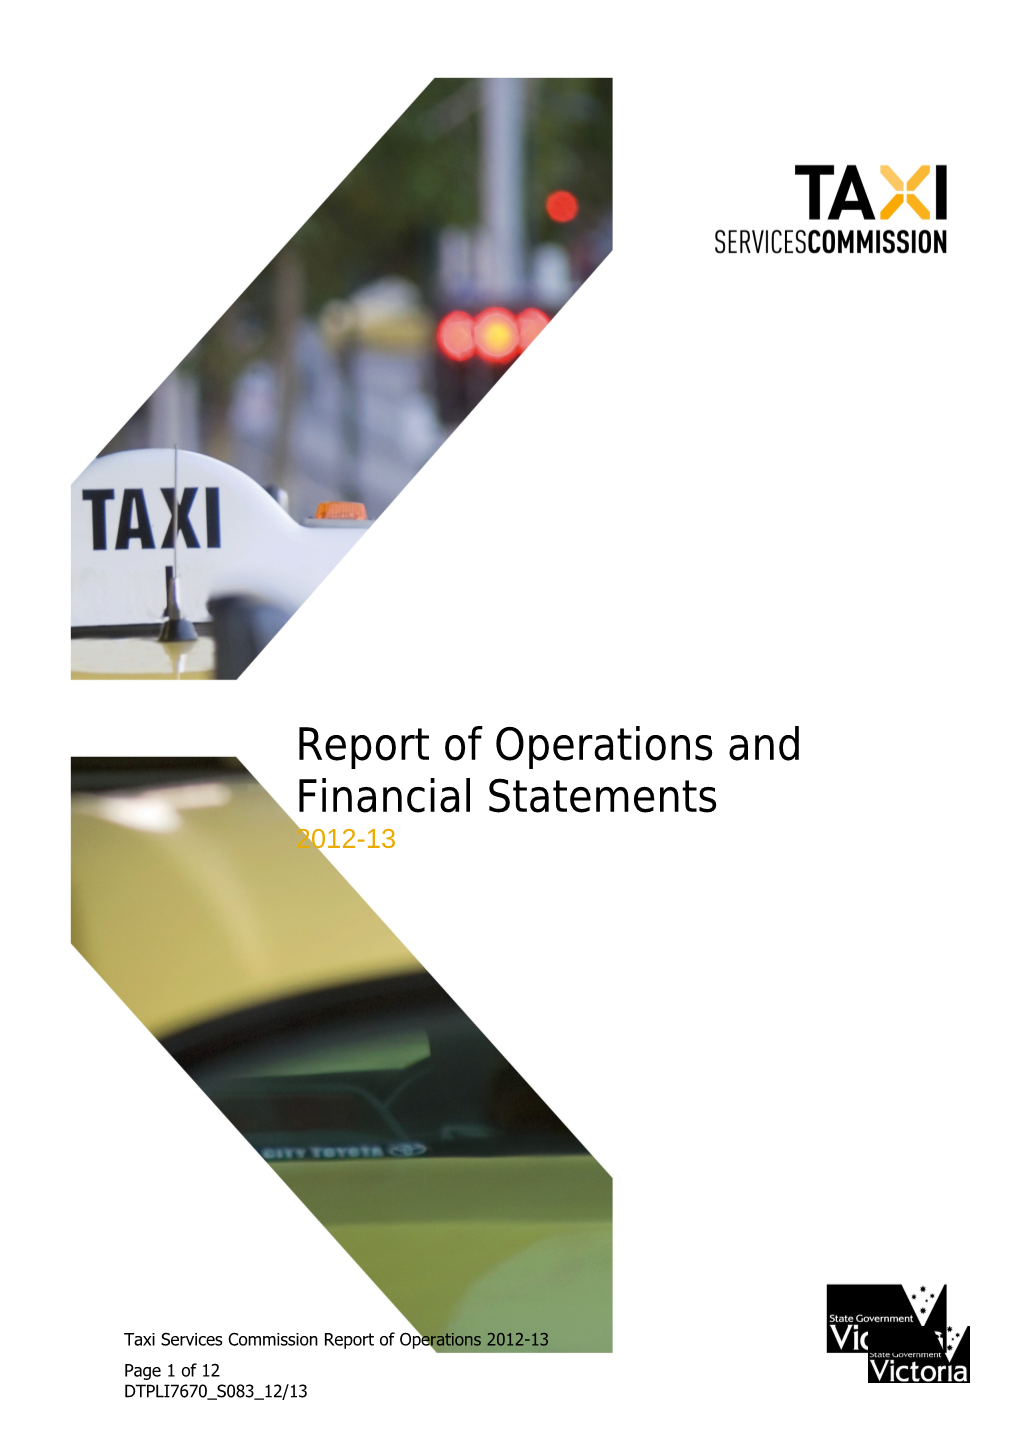 TSC Report of Operations and Financial Statements 2012-13